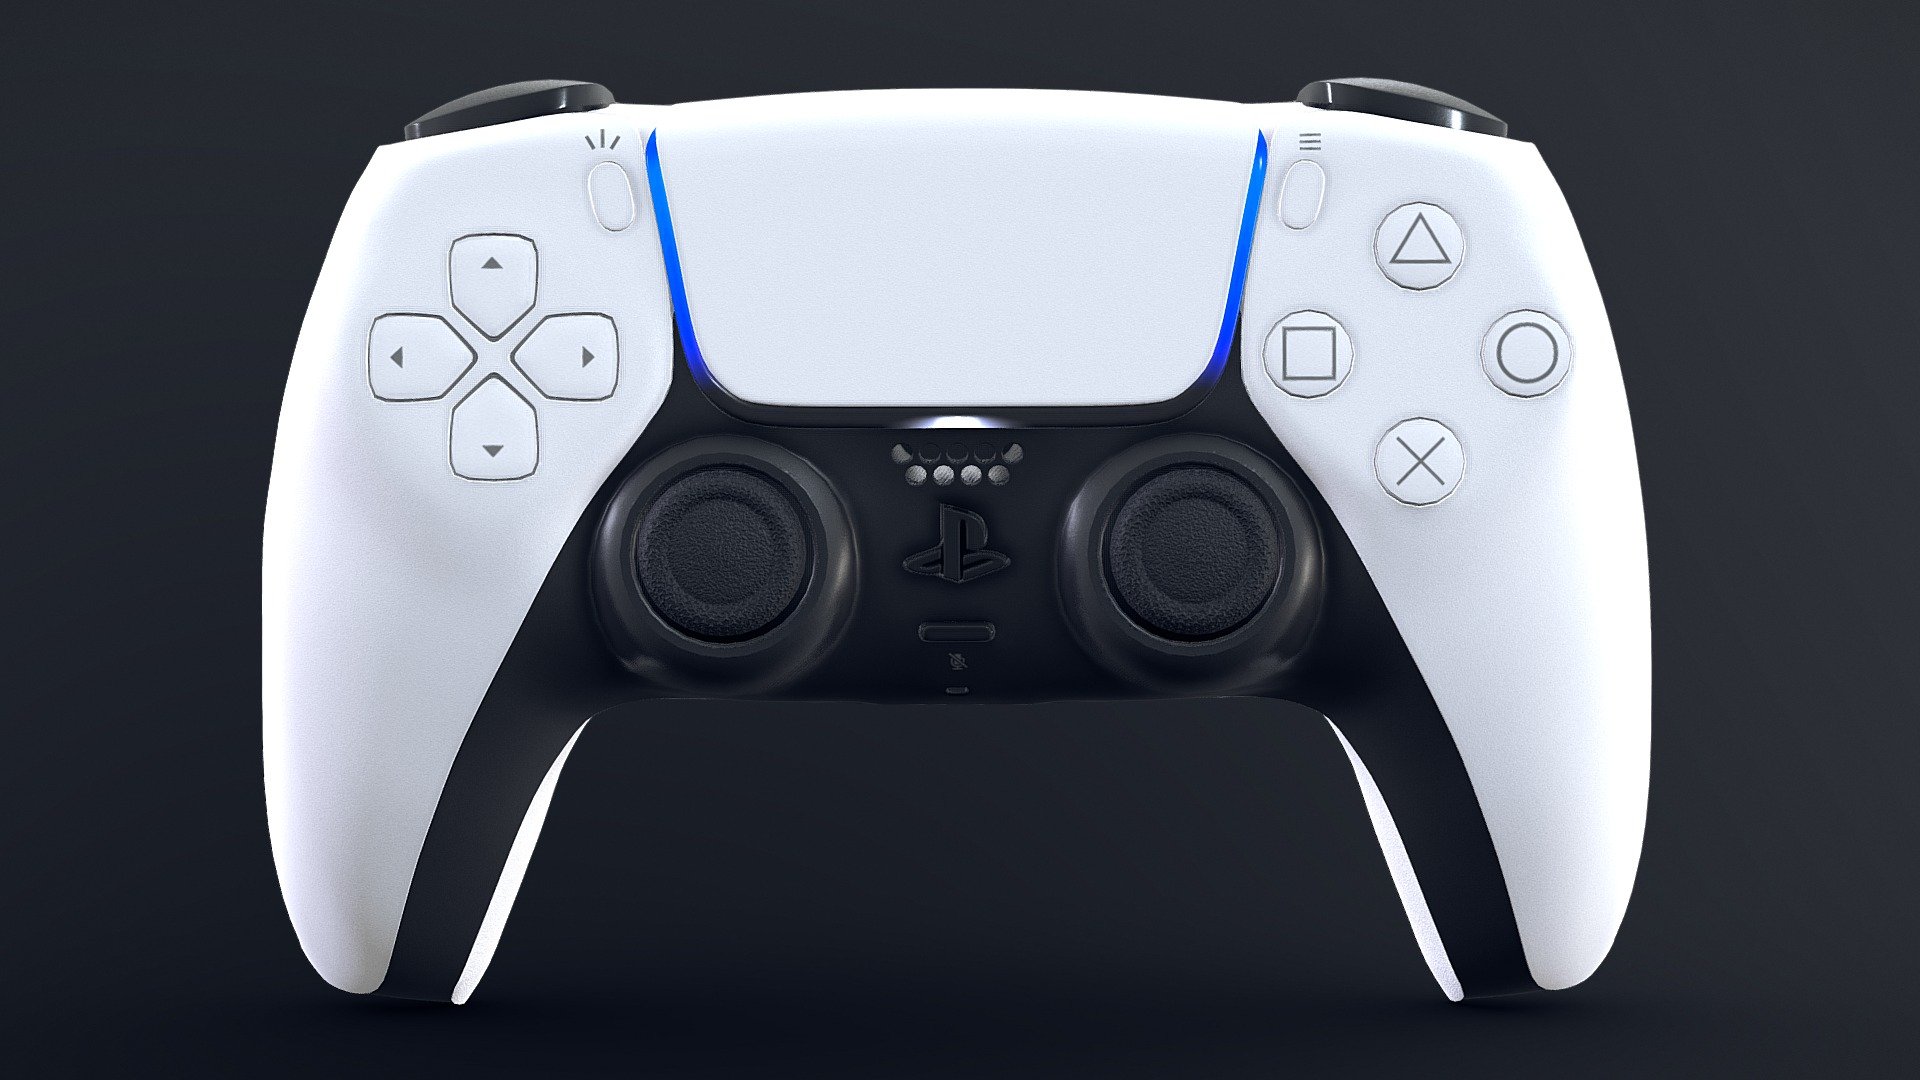 Dualsense Controller (PlayStation 5 ) model, with a PBR workflow, mainly suitable for realism purposes (e. g. interior archviz), but is also compatible to use for VR/AR projects, and as a game asset, if desired.

The collection contains a Zip file, with:




2 Versions with each model/set, for every file format: Beveled - suitable for subdivision and/or smooth shading, Subdivided - subdivided in advance;

Tailored textures with multiple resolutions (2K, 4K, 6k, and 8K for some assets) for a PBR Metalness workflow, such as DIFFUSE/METALLIC/ROUGHNESS/NORMAL;

Both OpenGL and DirectX normal maps;

An additional preview scene with a camera, lights, and a background;

All models and their versions are properly UV unwrapped, appropriate pivot/origin points and object parenting (if needed)

Formats: 




.fbx

.obj

.dae

.blend




Scale: Real World - Metric

Geometry: All quads with few appropriate triangles

PlayStation 5 and Dualsense controller bundle is available on my profile 3d model